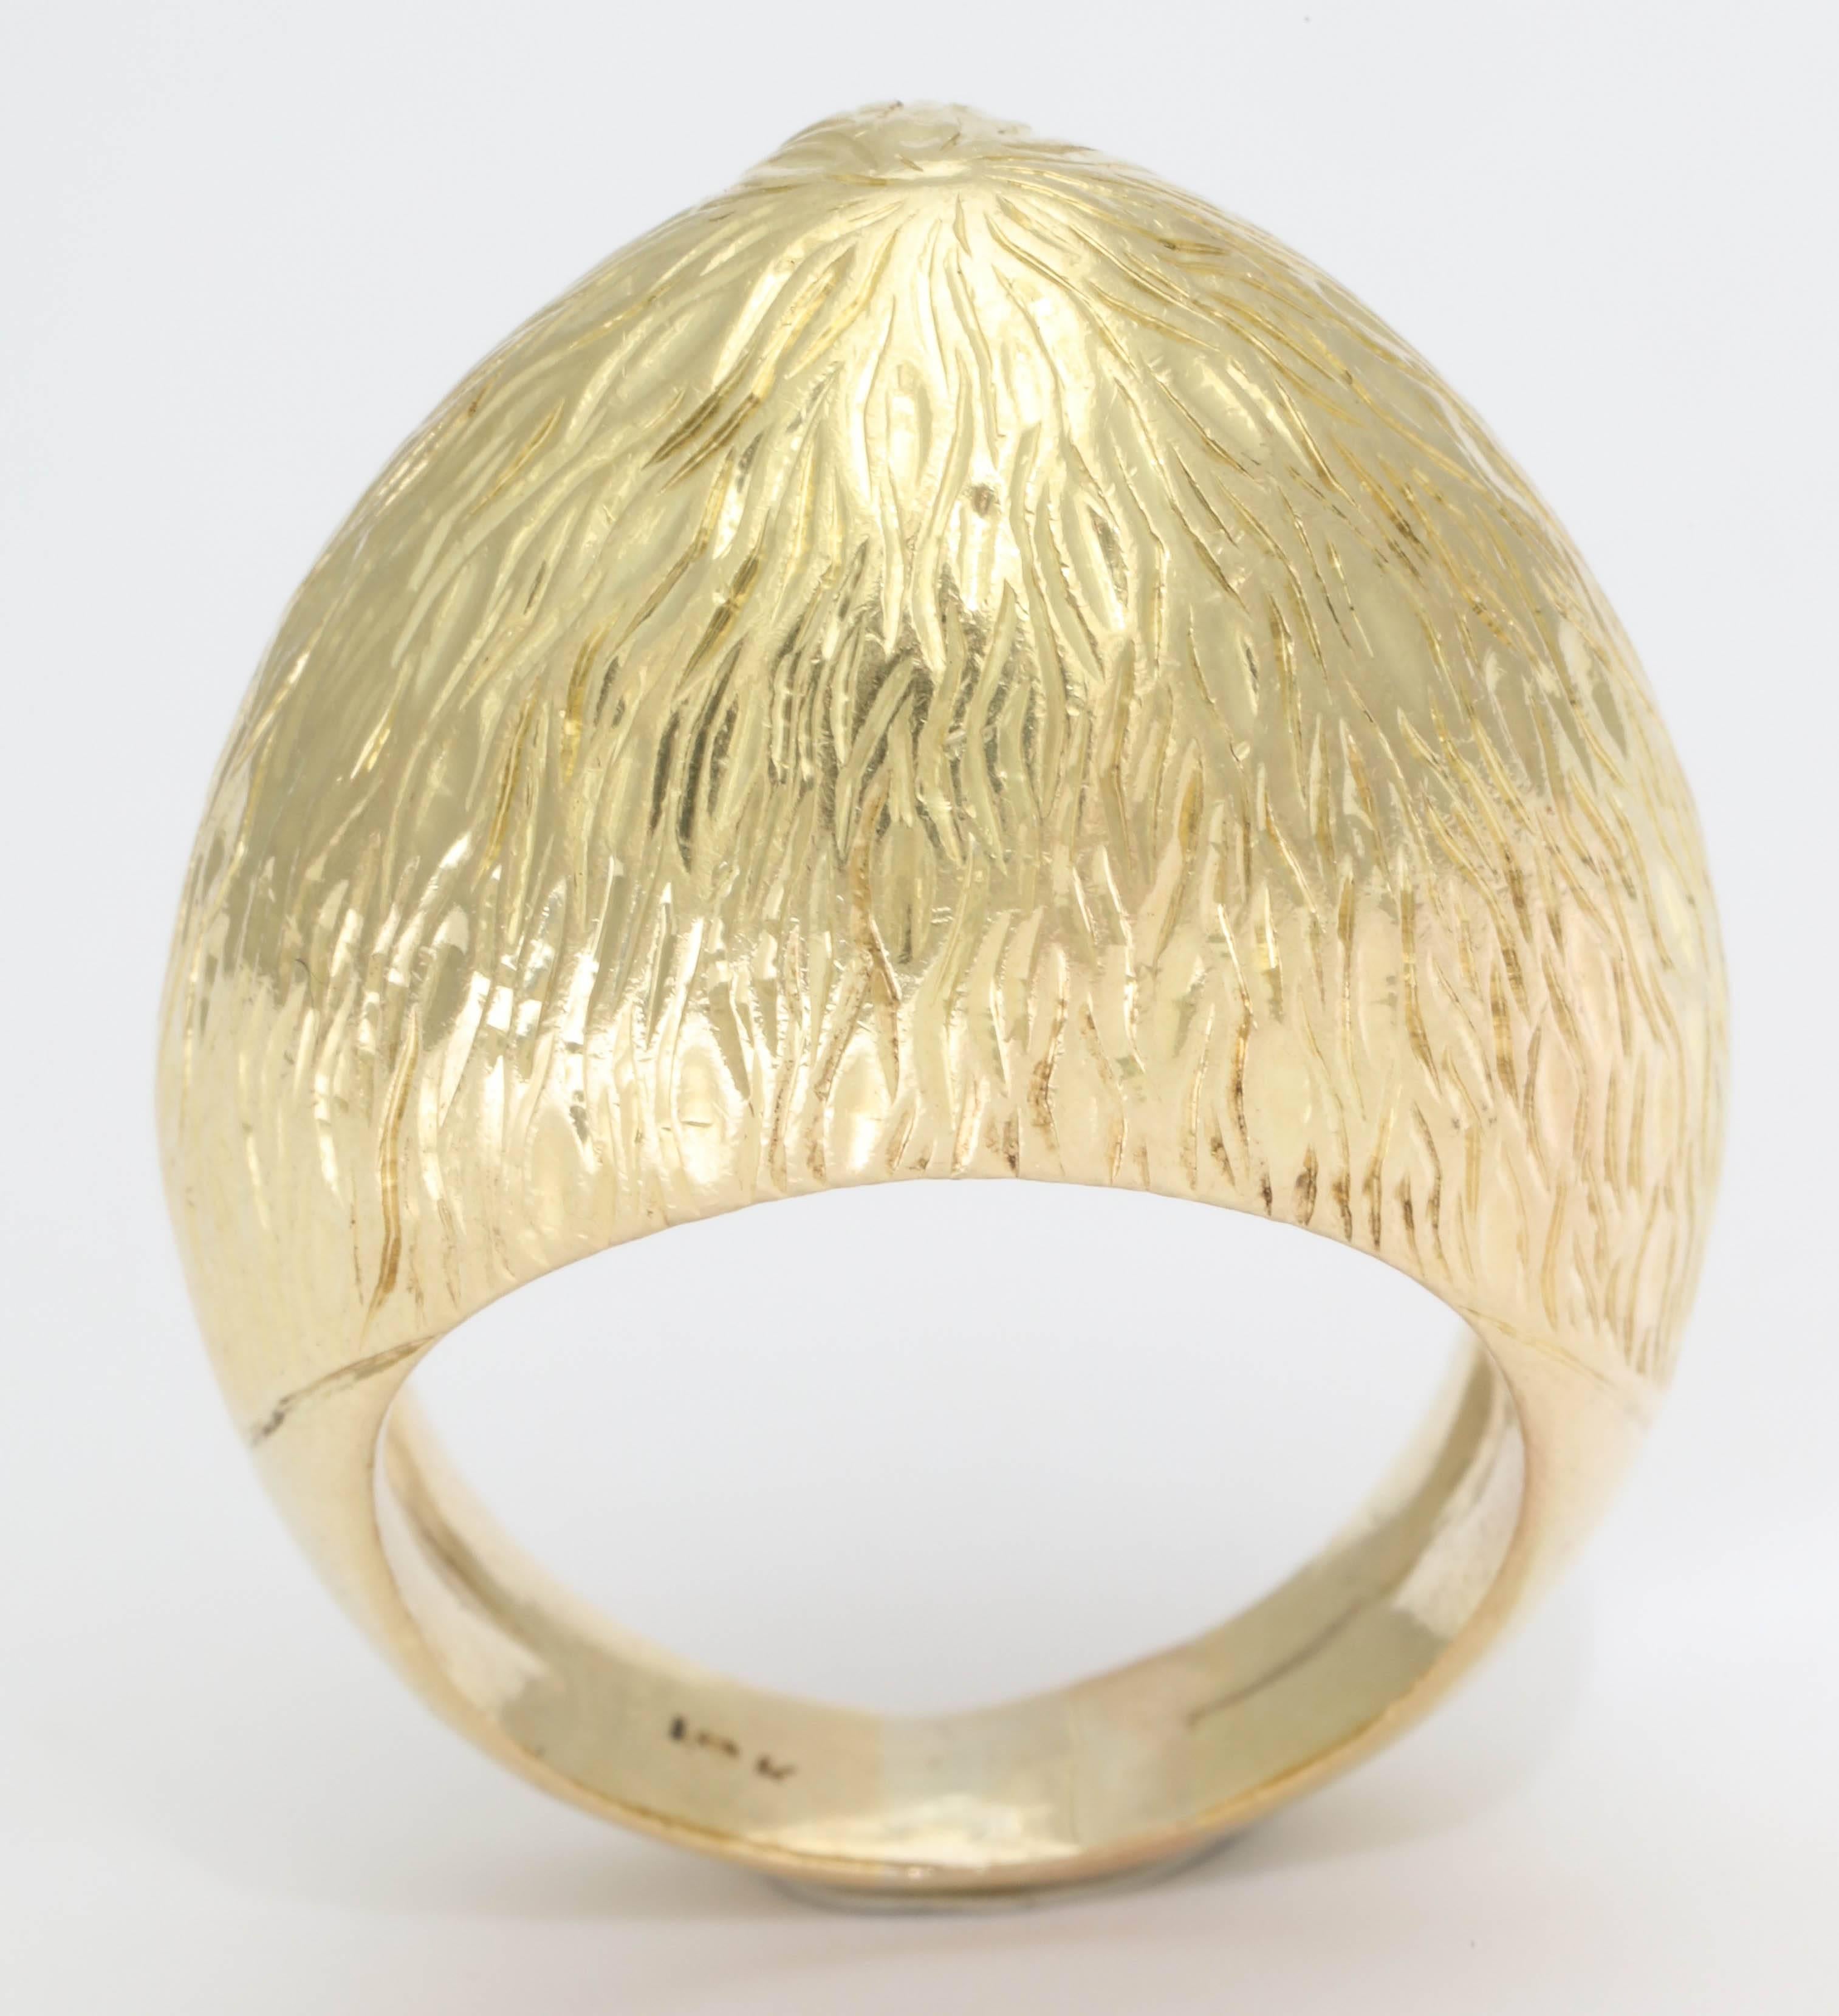 18kt yellow gold Bold textured design Large Cocktail Ring Consisting Of Numerous Engraved Assymetrical Wavy Lines Engraved in the design of the ring. Designed in America in The 1970's. NOTE: Ring Currently A size 7 and may easily be Resized to any